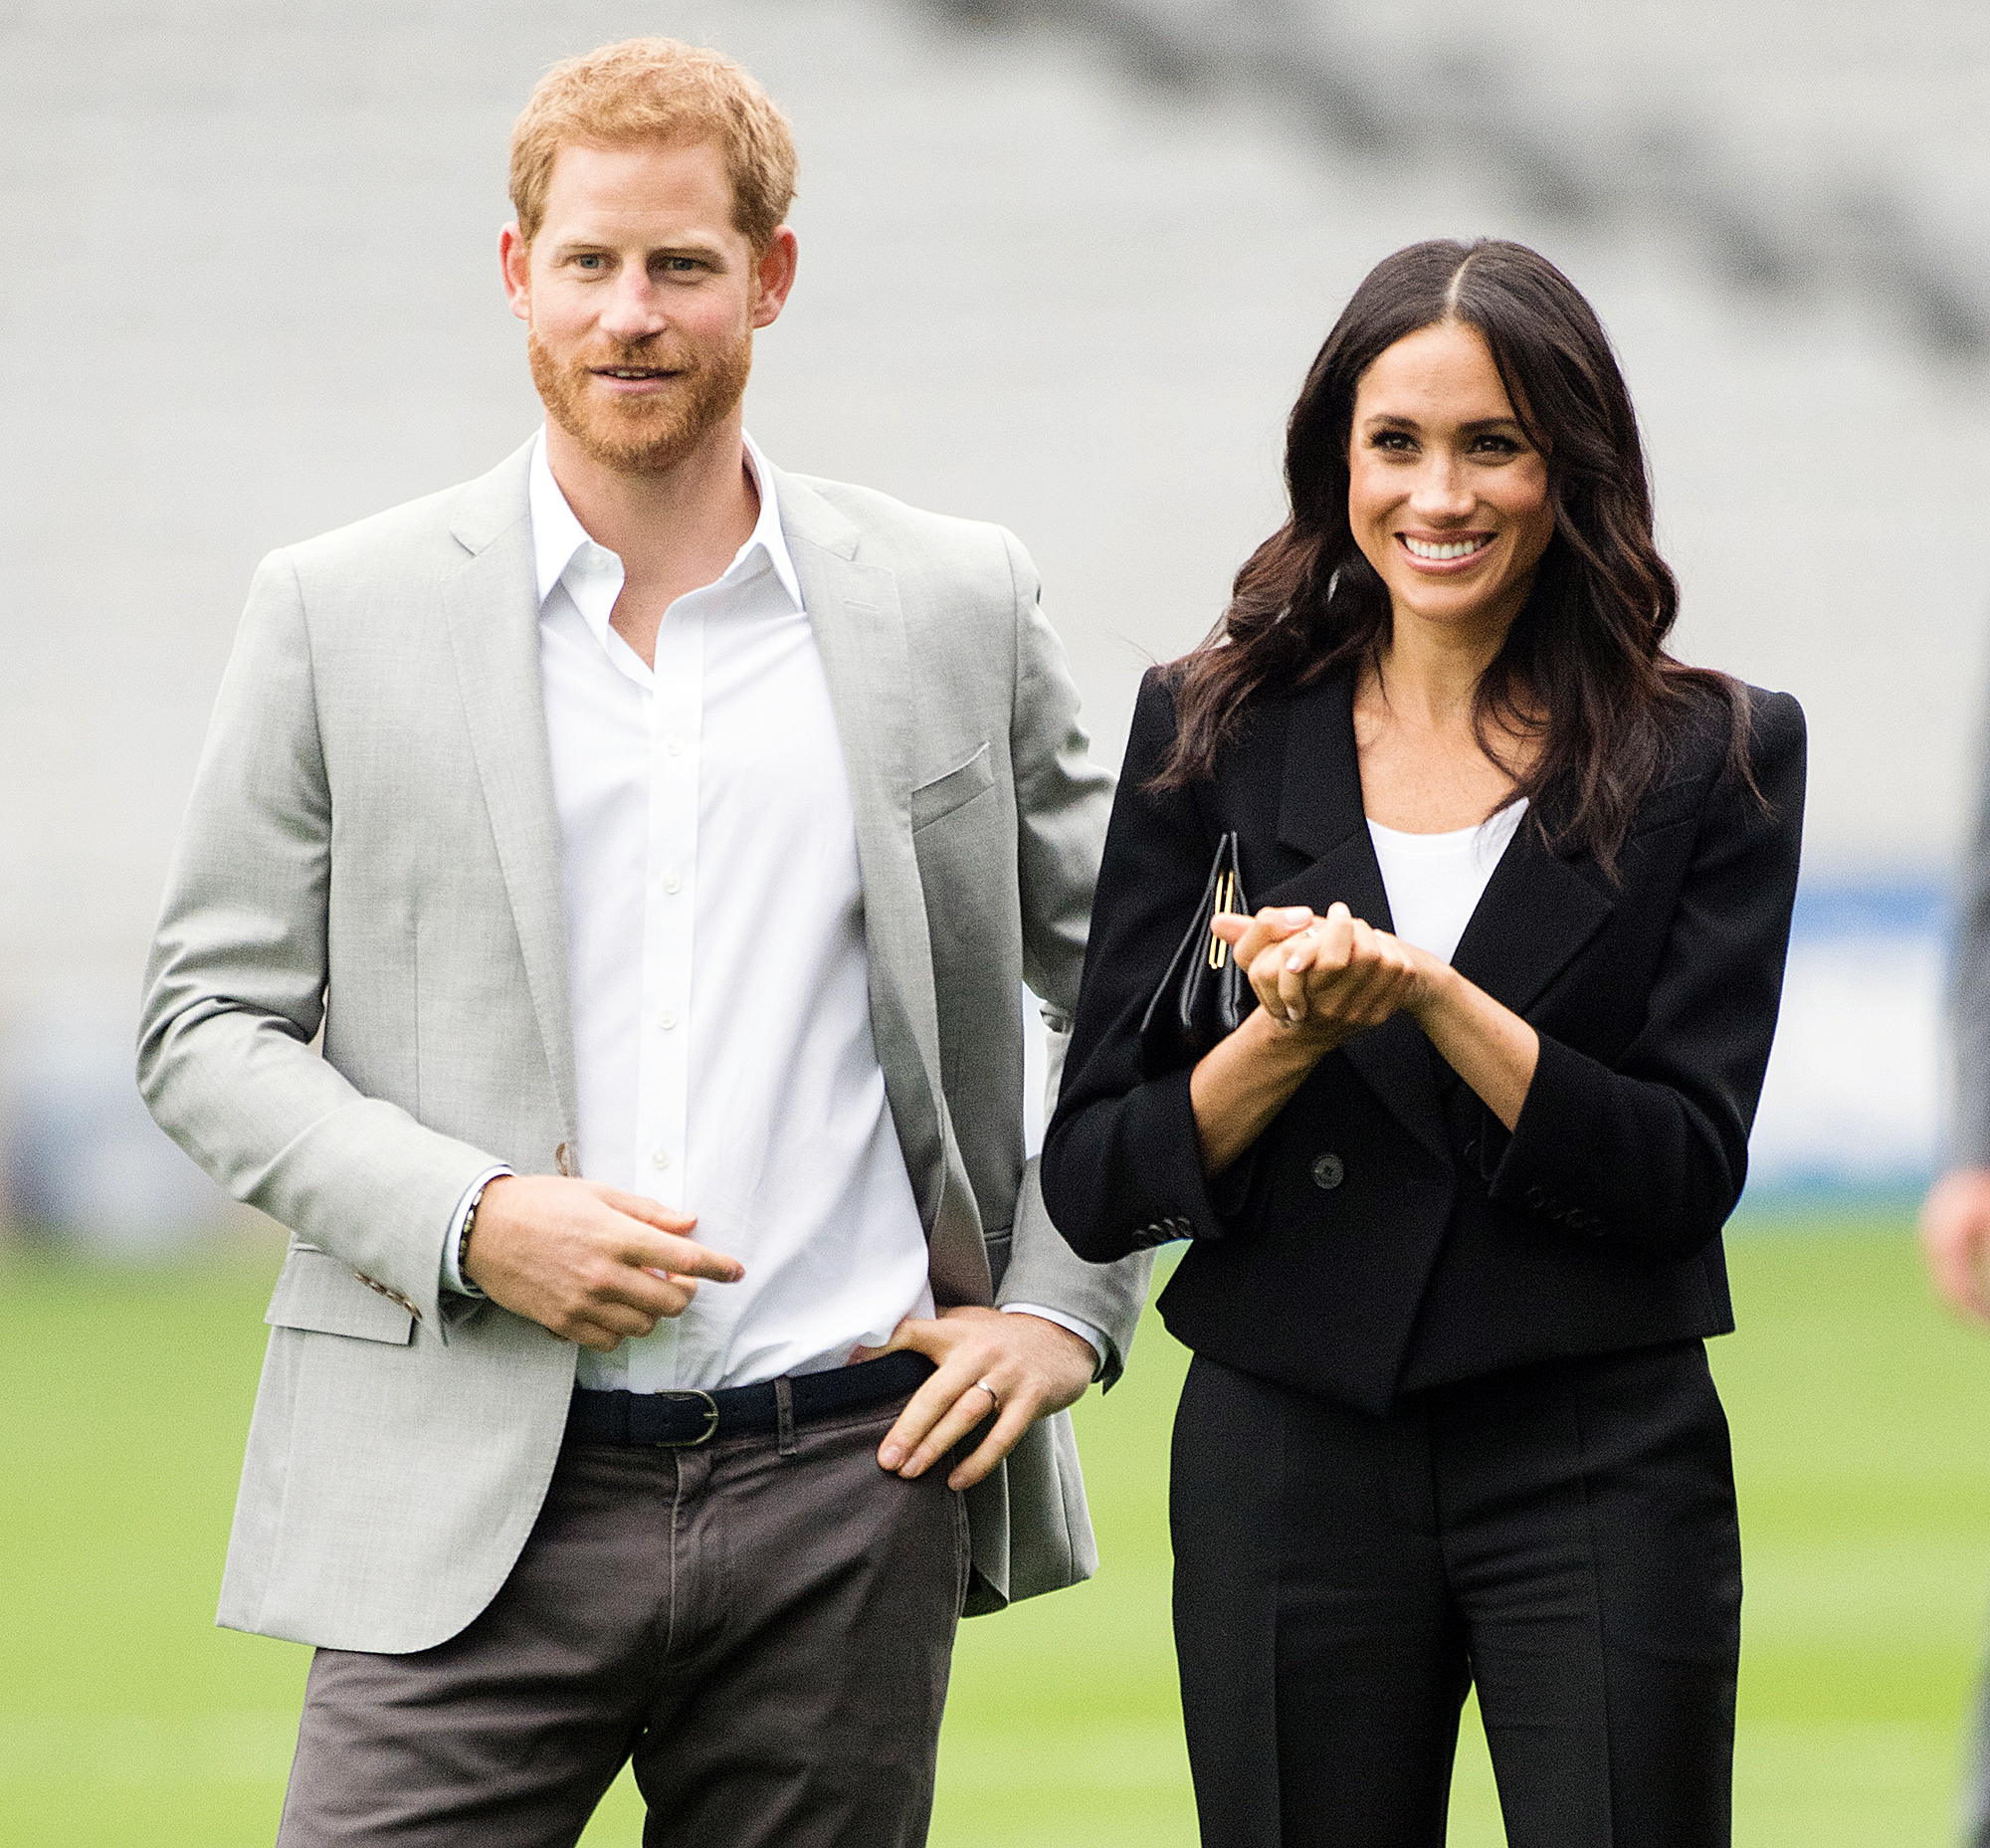   The Duchess Meghan excited to show Prince Harry all that she loves 